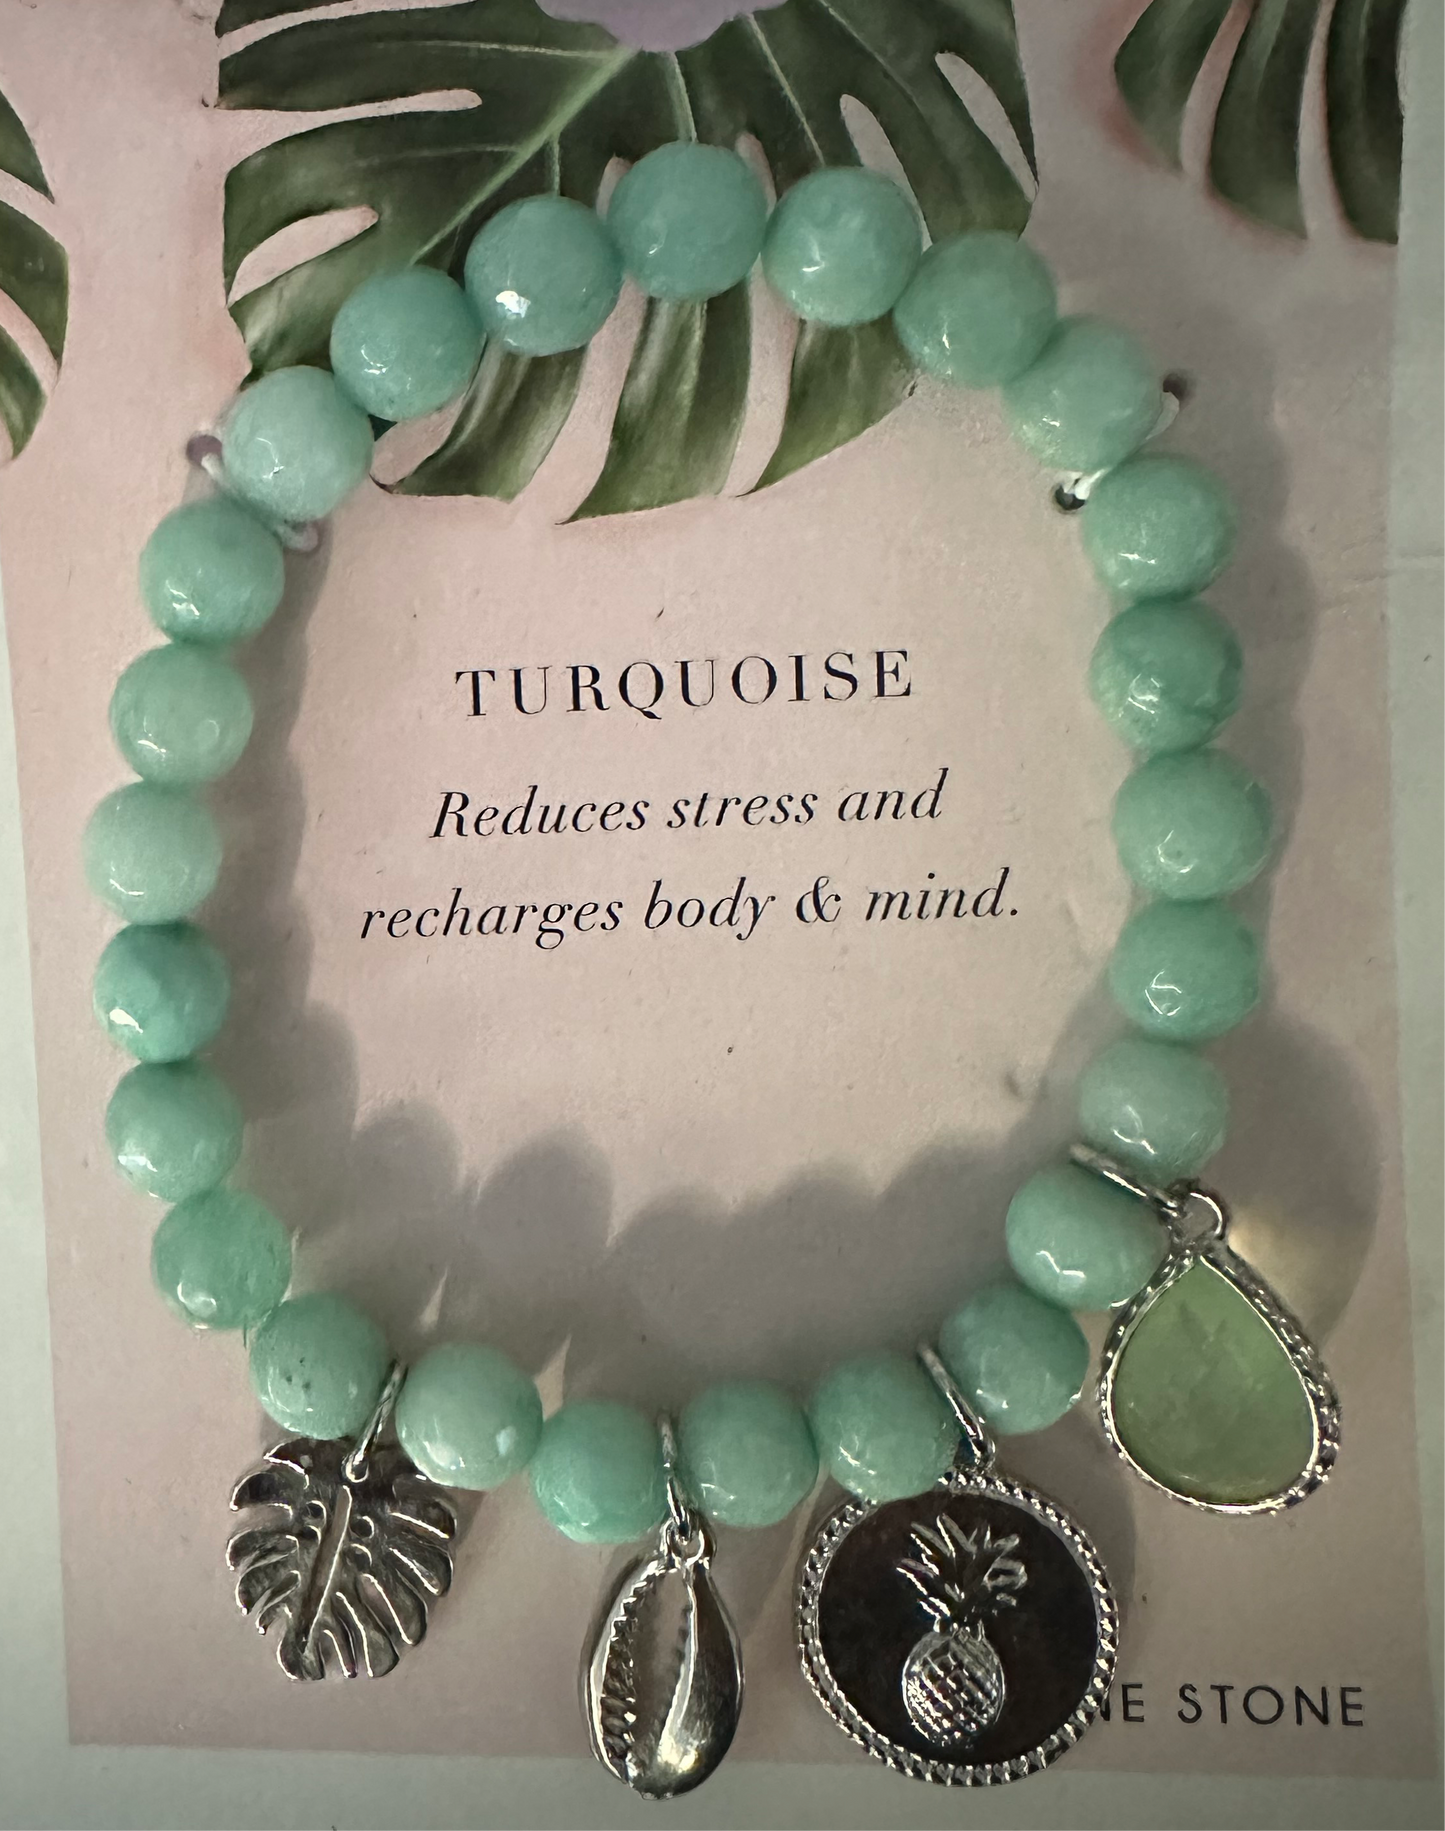 Turquoise Stone Bracelet with 4 Charms: December Birthstone